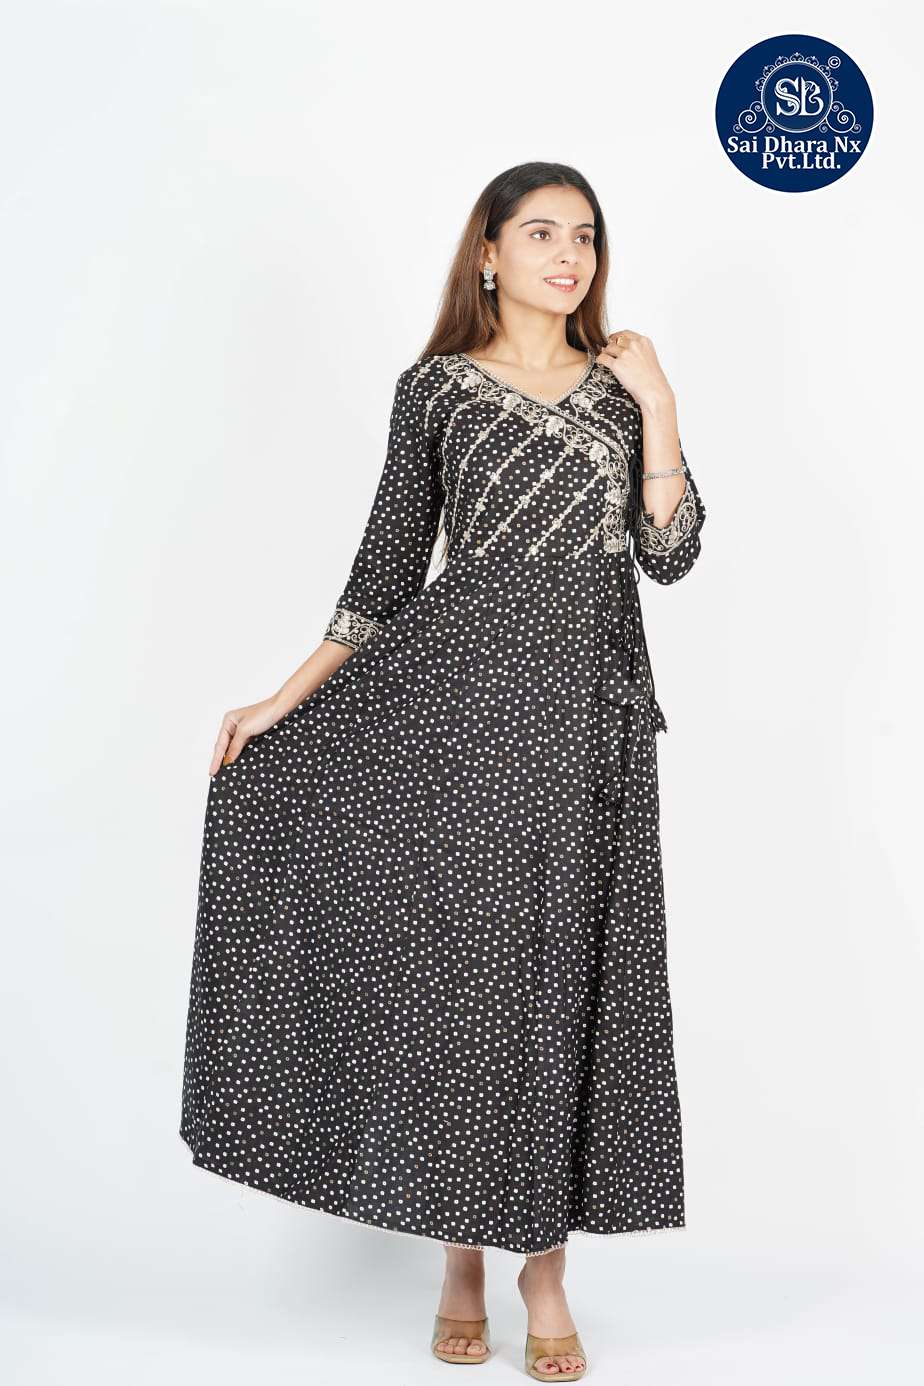 SAIDHARANX PRESENT LATEST ARRIVED MUSLIN FABRIC BASED BLACK ANARKALI GOWN COLLECTION WHOLESALE SHOP IN SURAT - SaiDharaNx